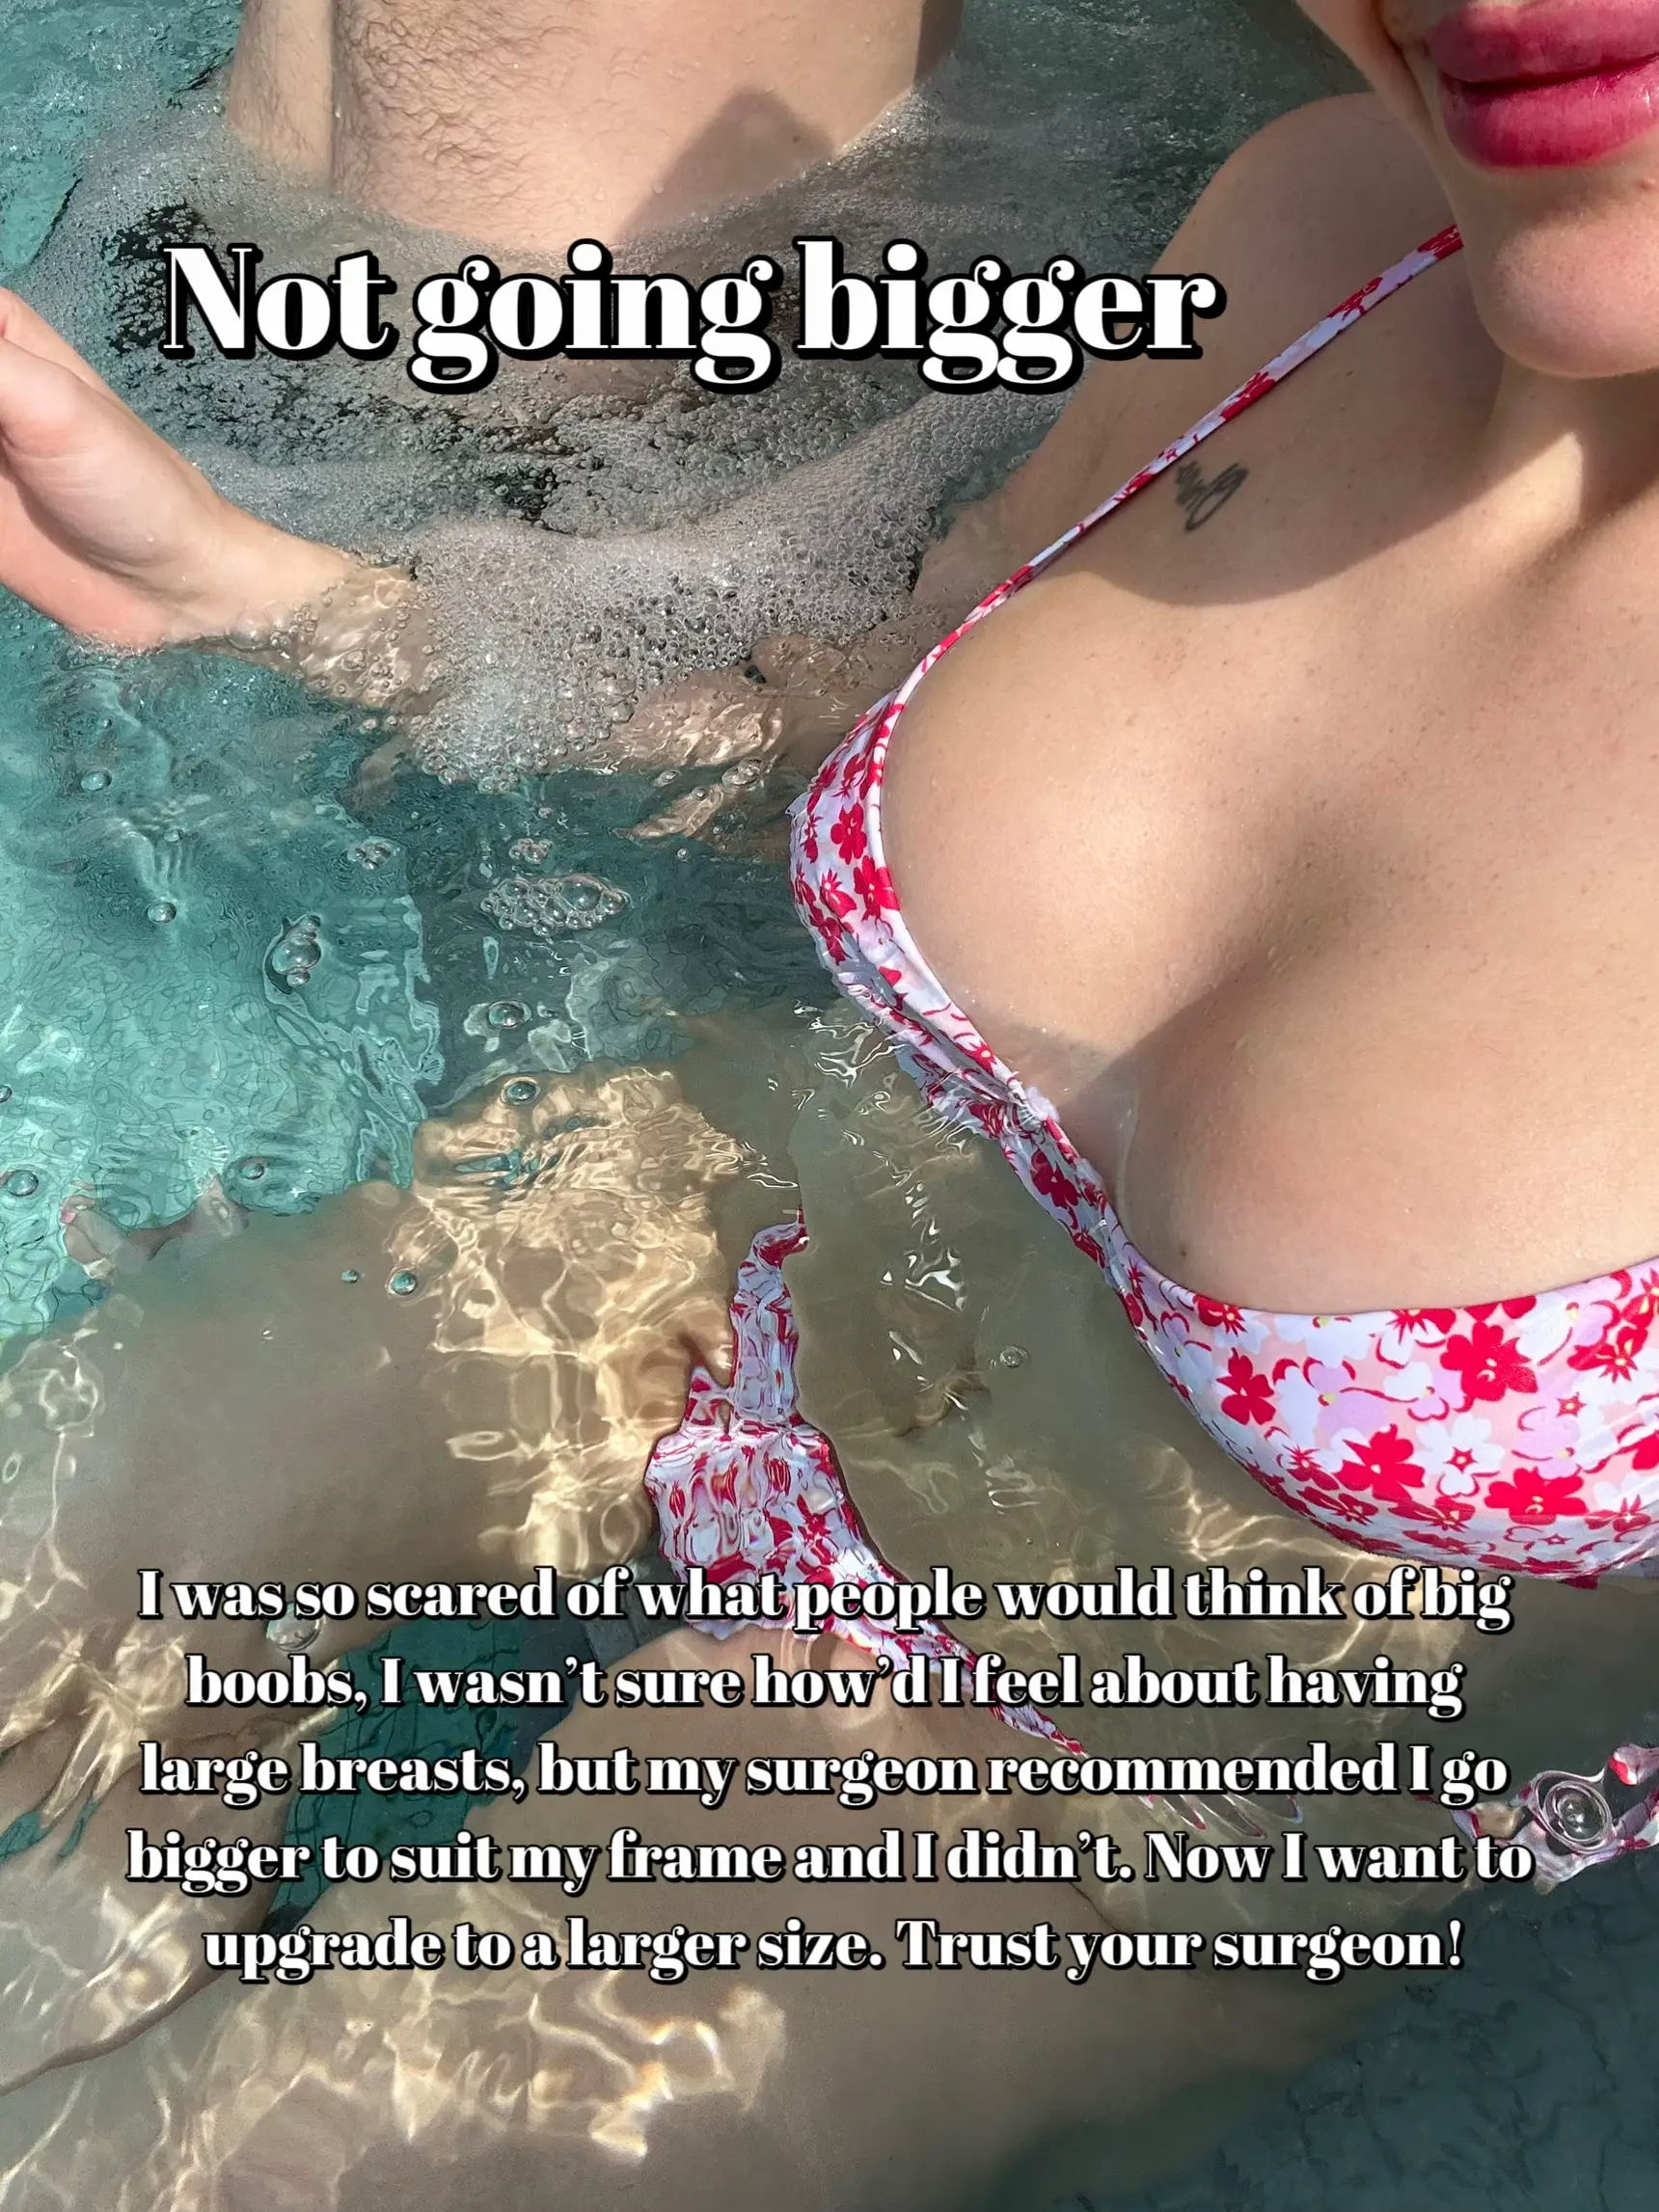 I have underboob, I'd like lipo in that area. I'm small. (Photos)